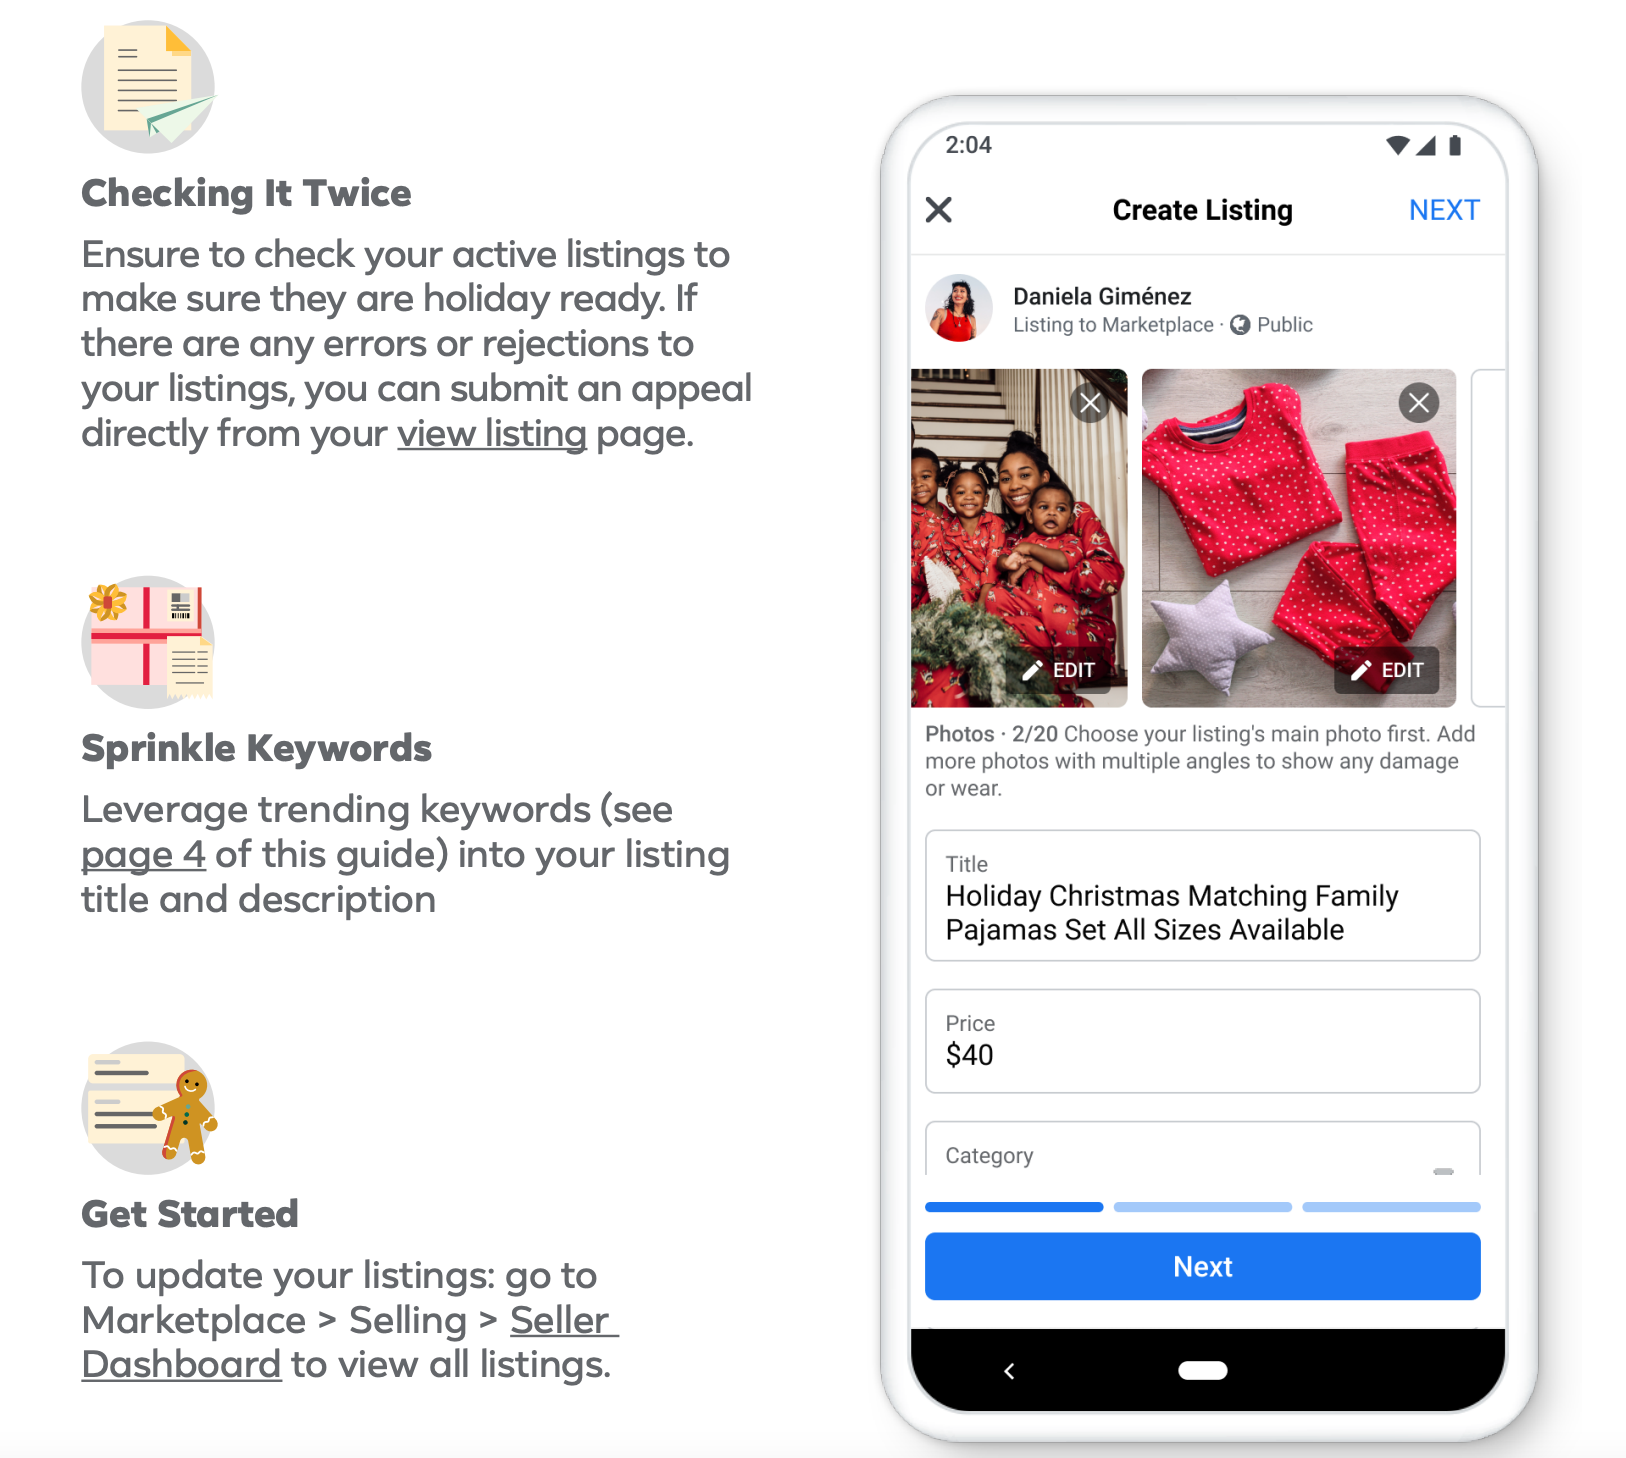 How to Get Facebook Marketplace?